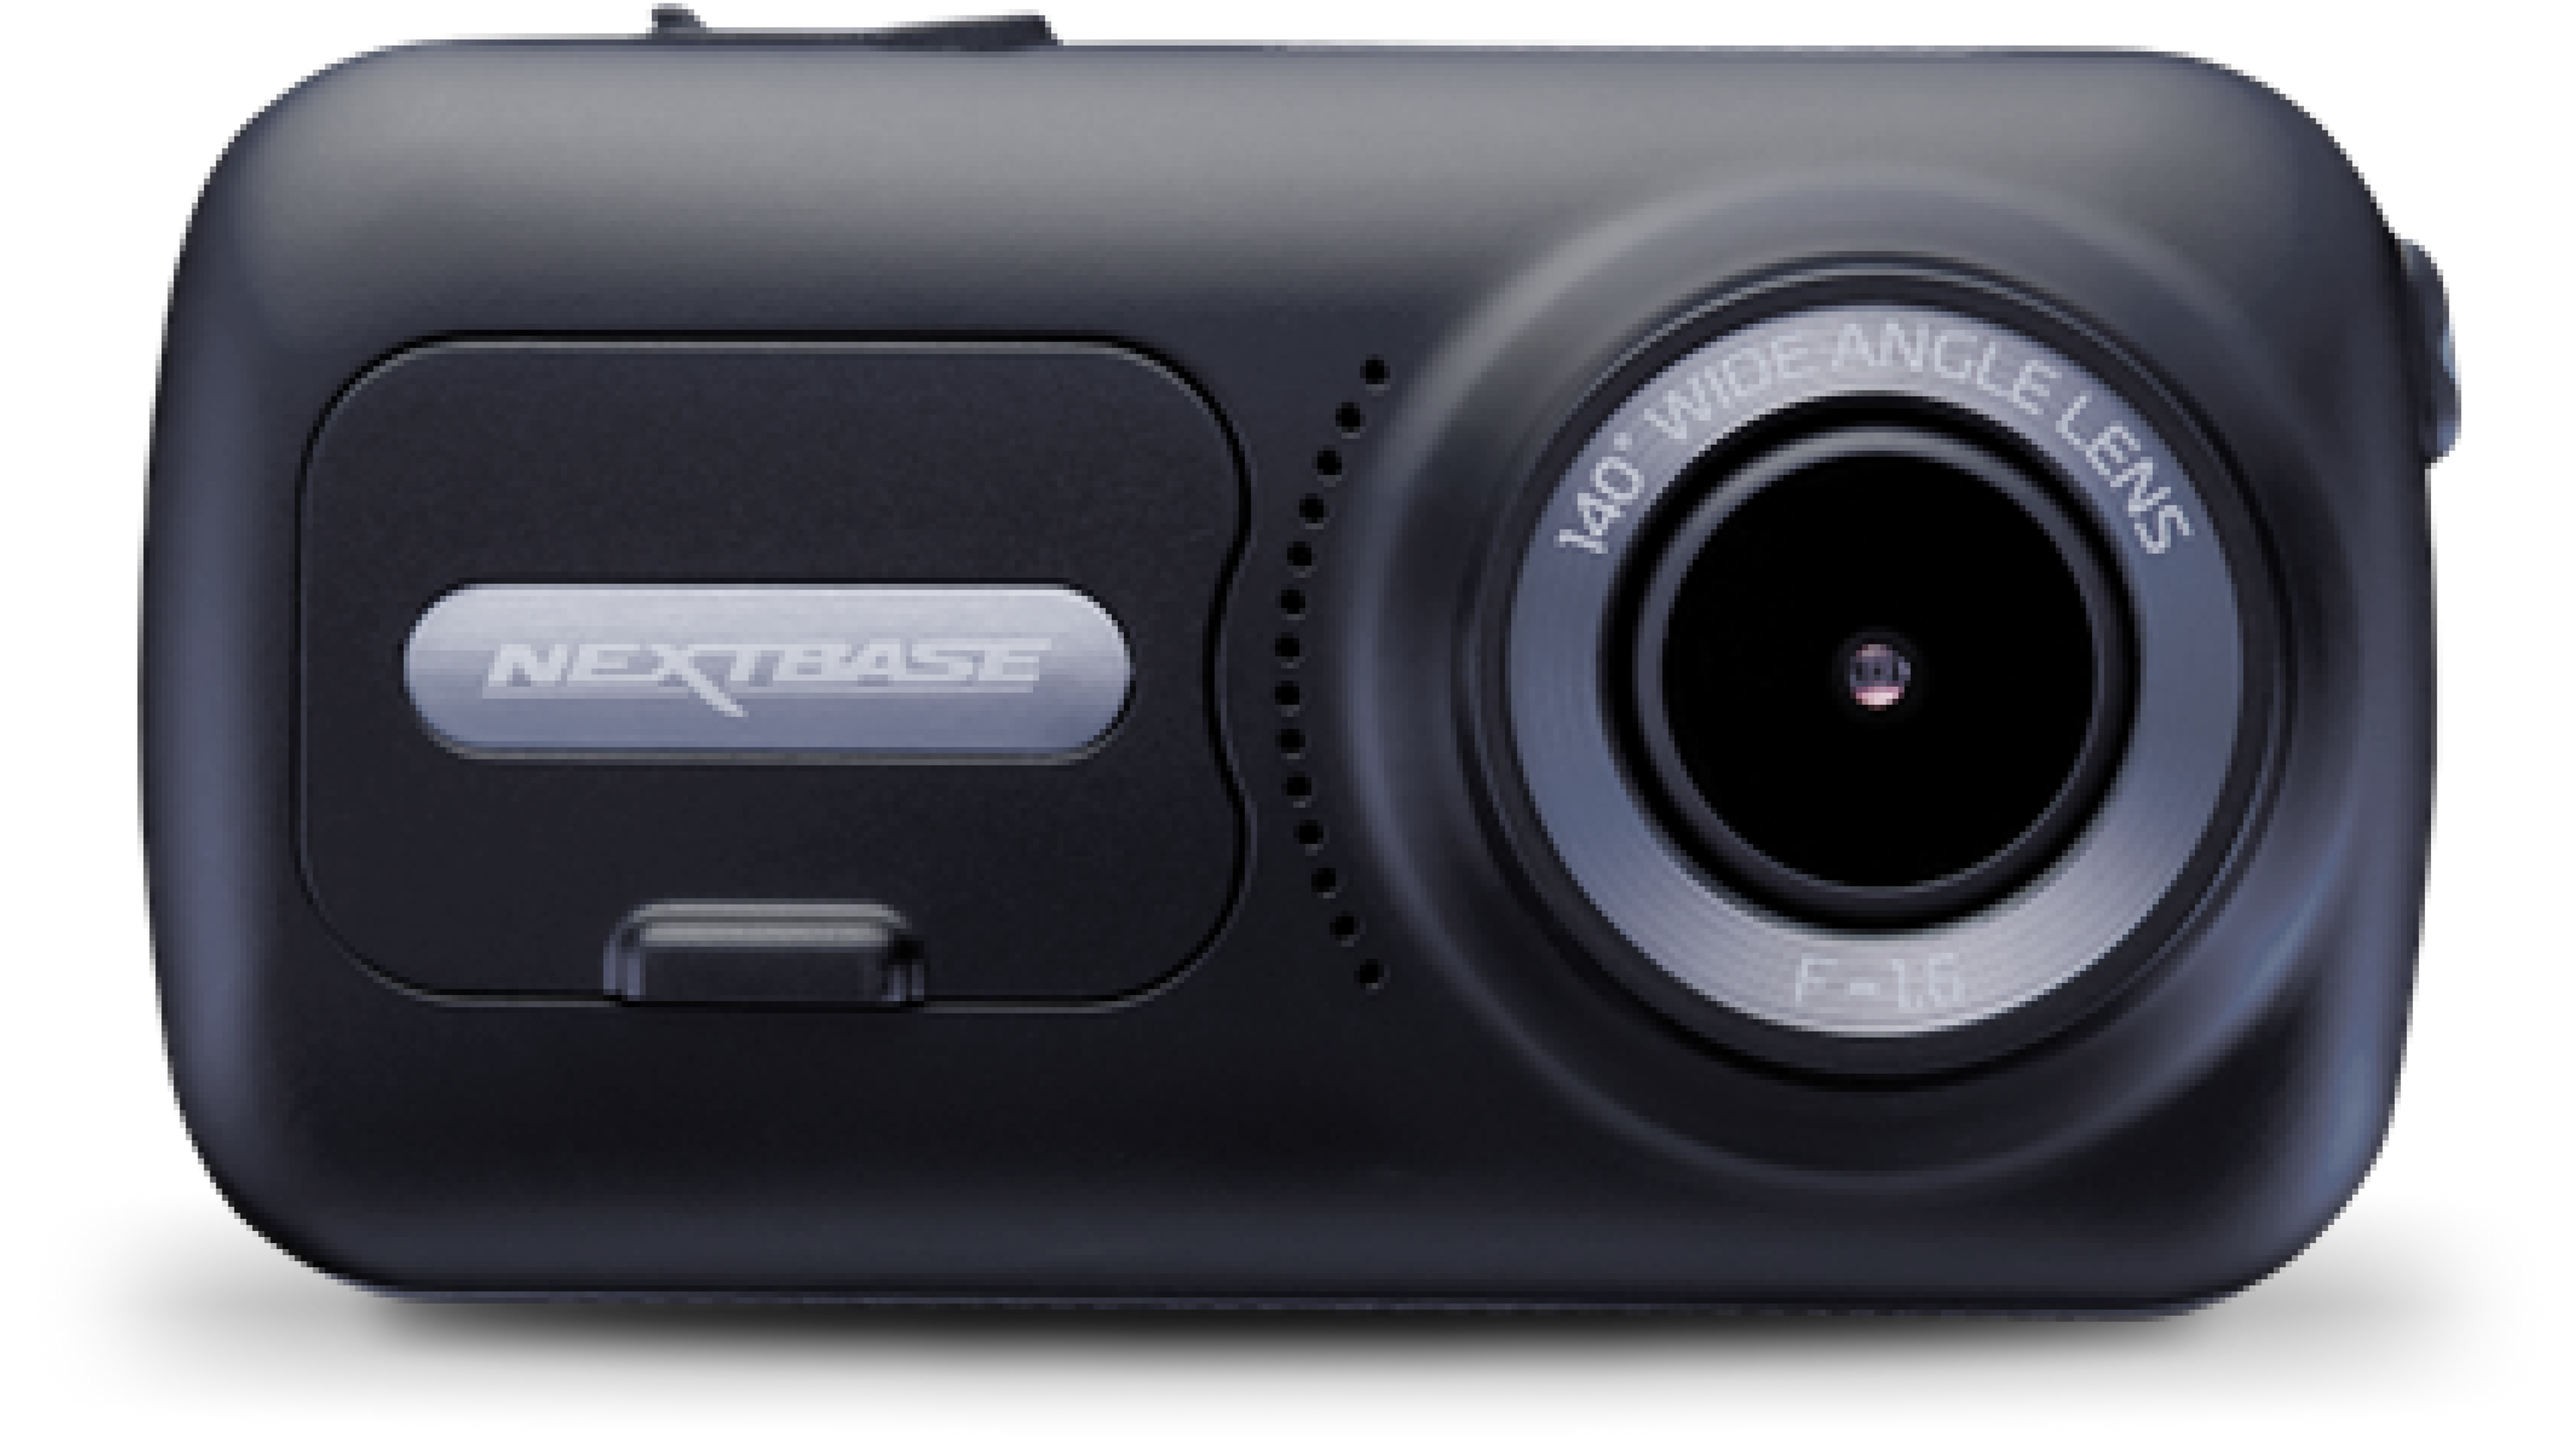 Nextbase Launches Series 2 Range, Introducing A Revolutionary New  Generation Of Dash Cam Technology To The US